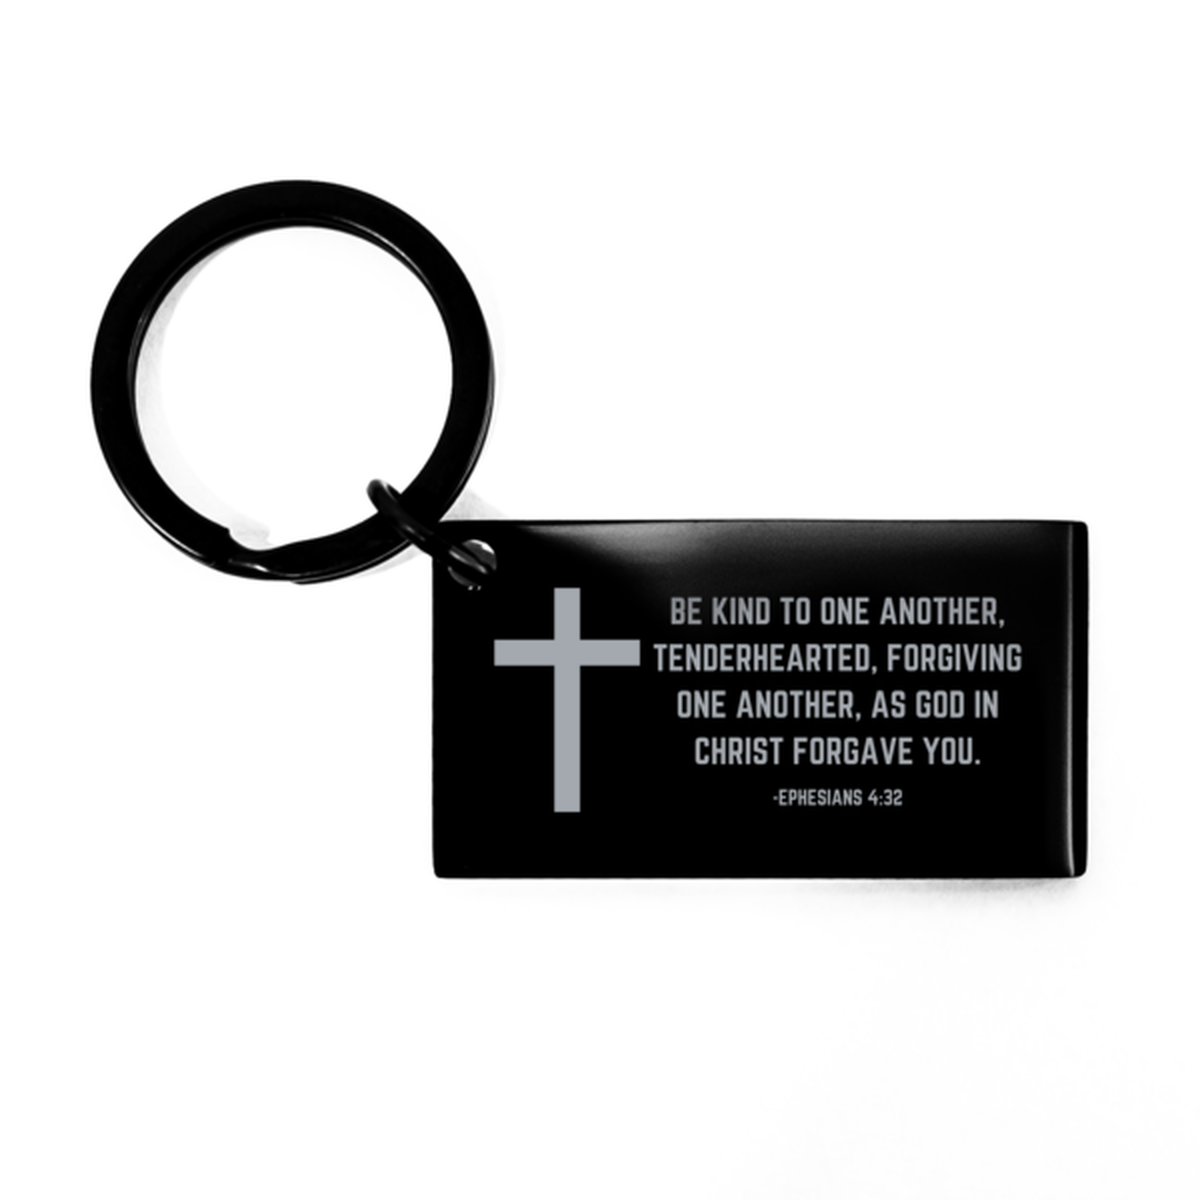 Baptism Gifts For Teenage Boys Girls, Christian Bible Verse Black Keychain, Be kind to one another, Confirmation Gifts, Bible Verse Keyring for Son, Godson, Grandson, Nephew